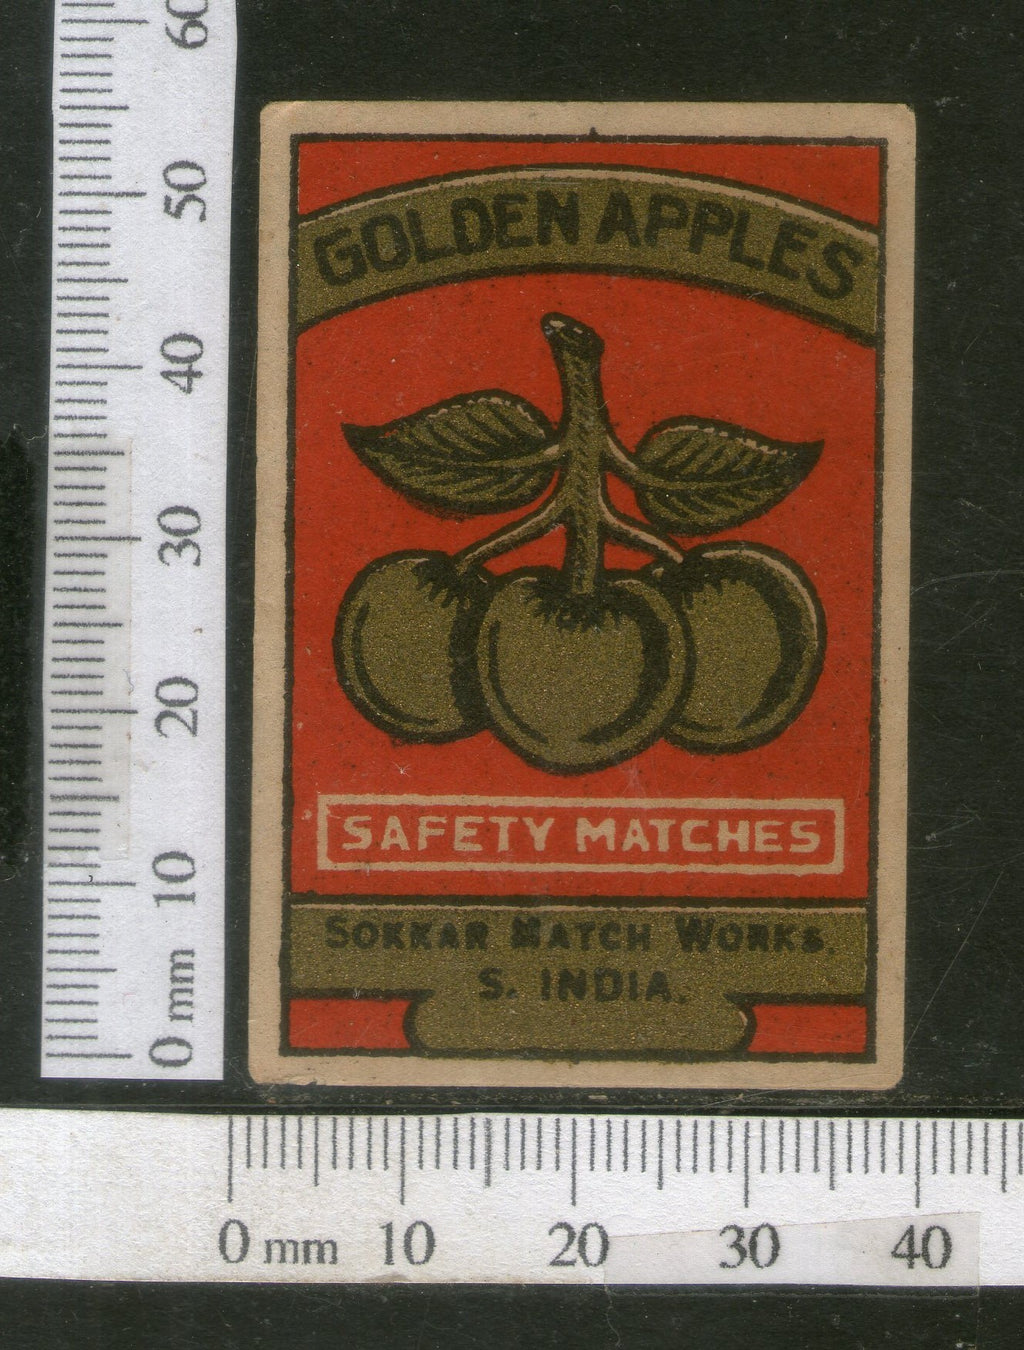 India 1950's Golden Apples Fruit Brand Match Box Label # MBL221 - Phil India Stamps